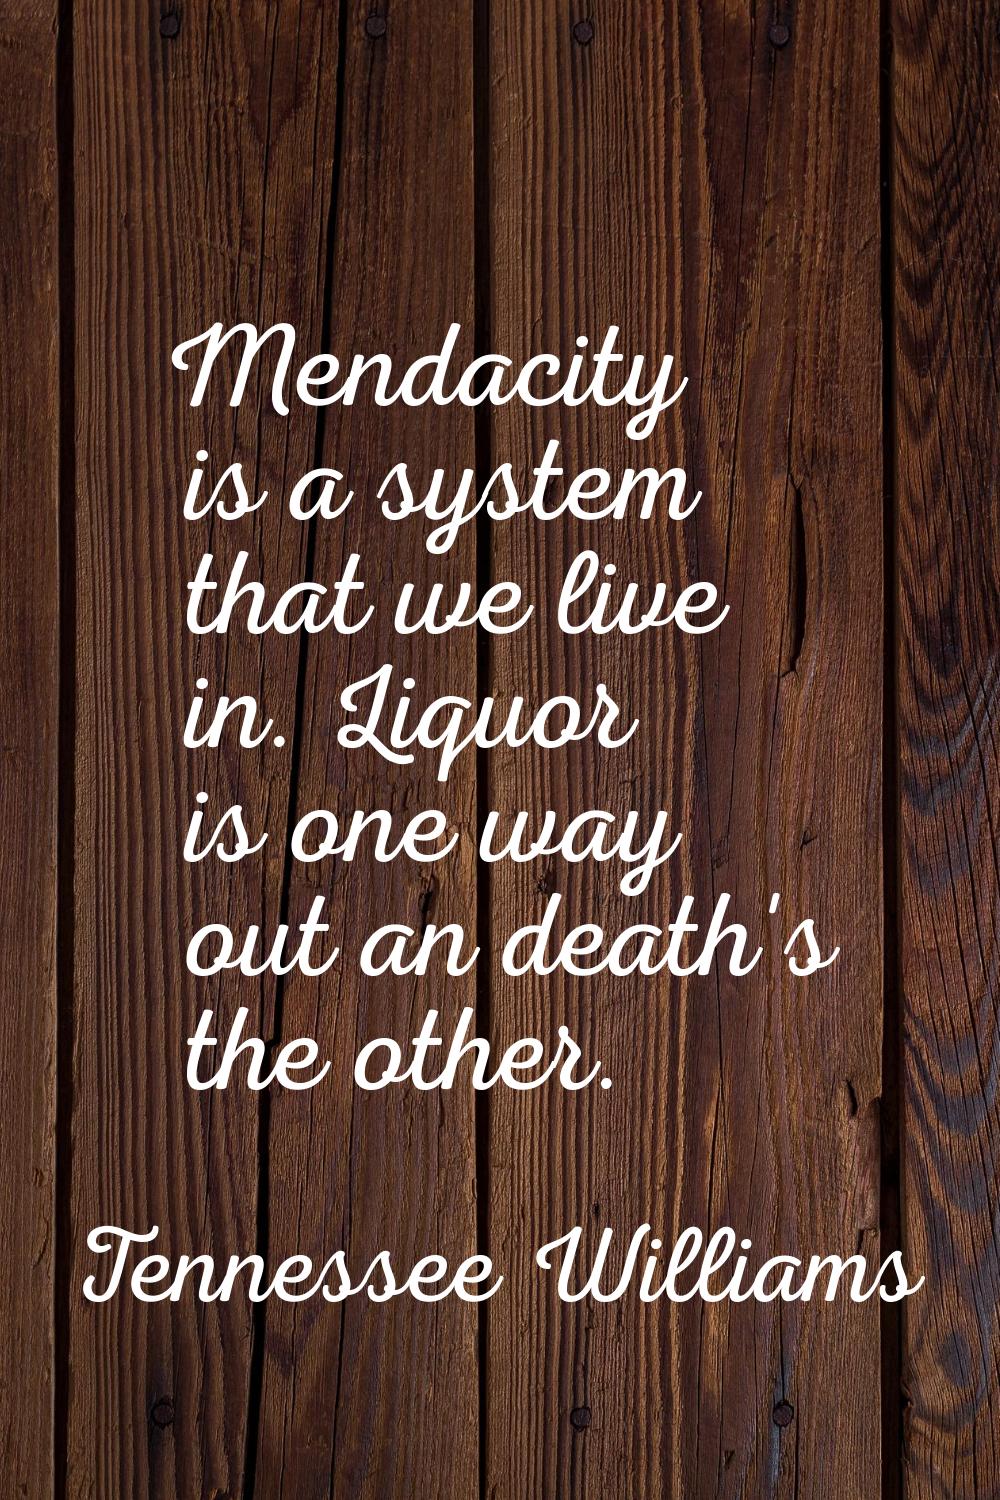 Mendacity is a system that we live in. Liquor is one way out an death's the other.